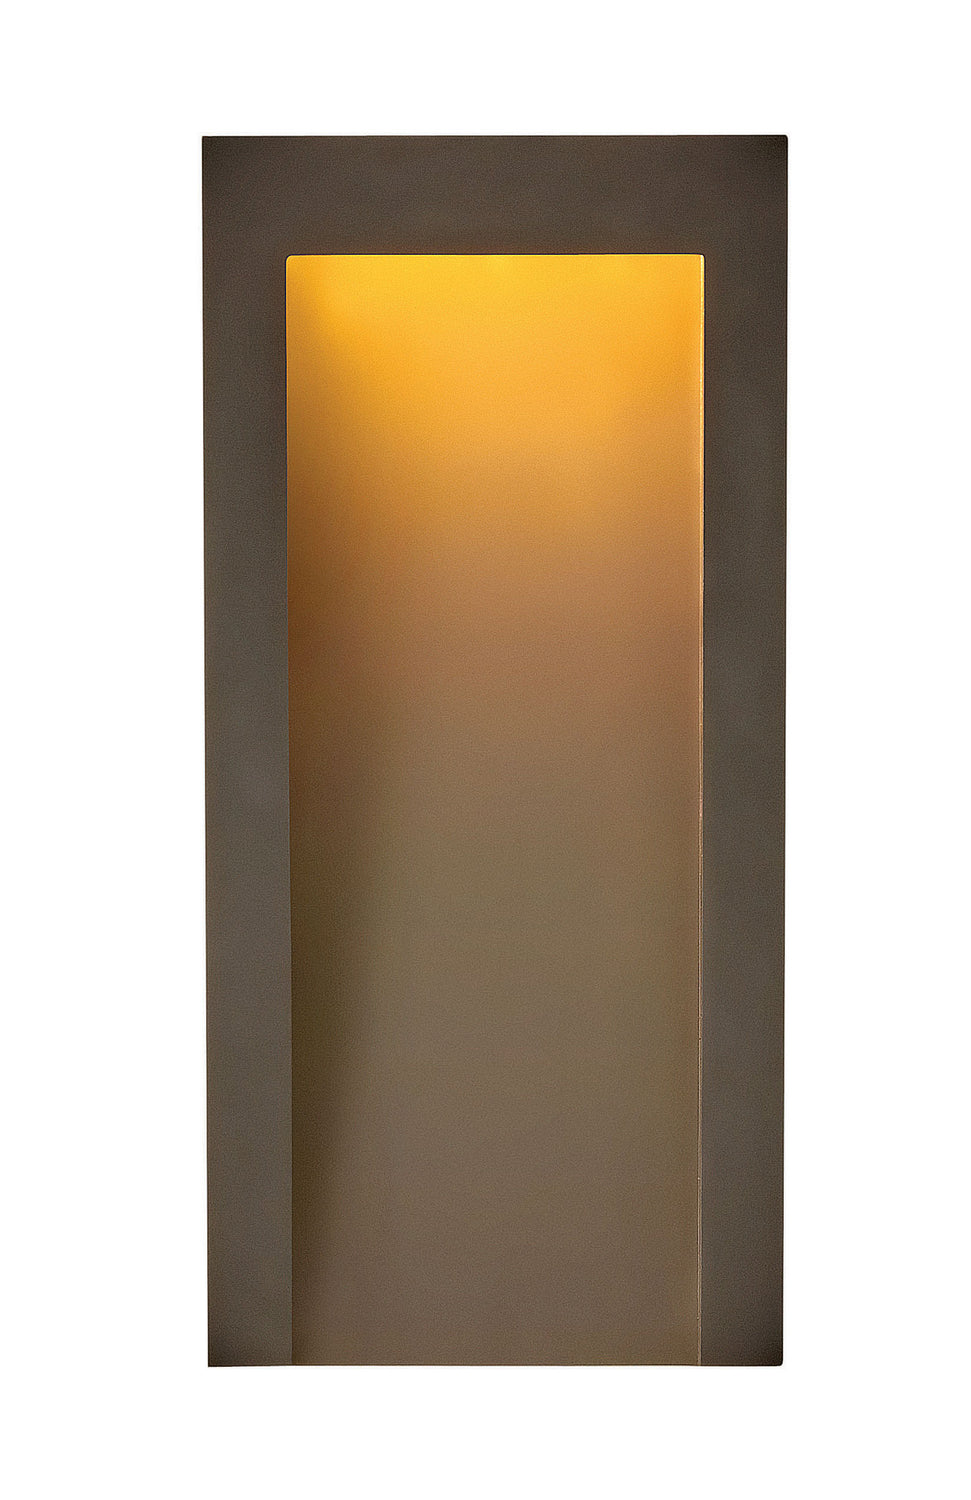 Hinkley - 2144TR - LED Outdoor Lantern - Taper - Textured Oil Rubbed Bronze